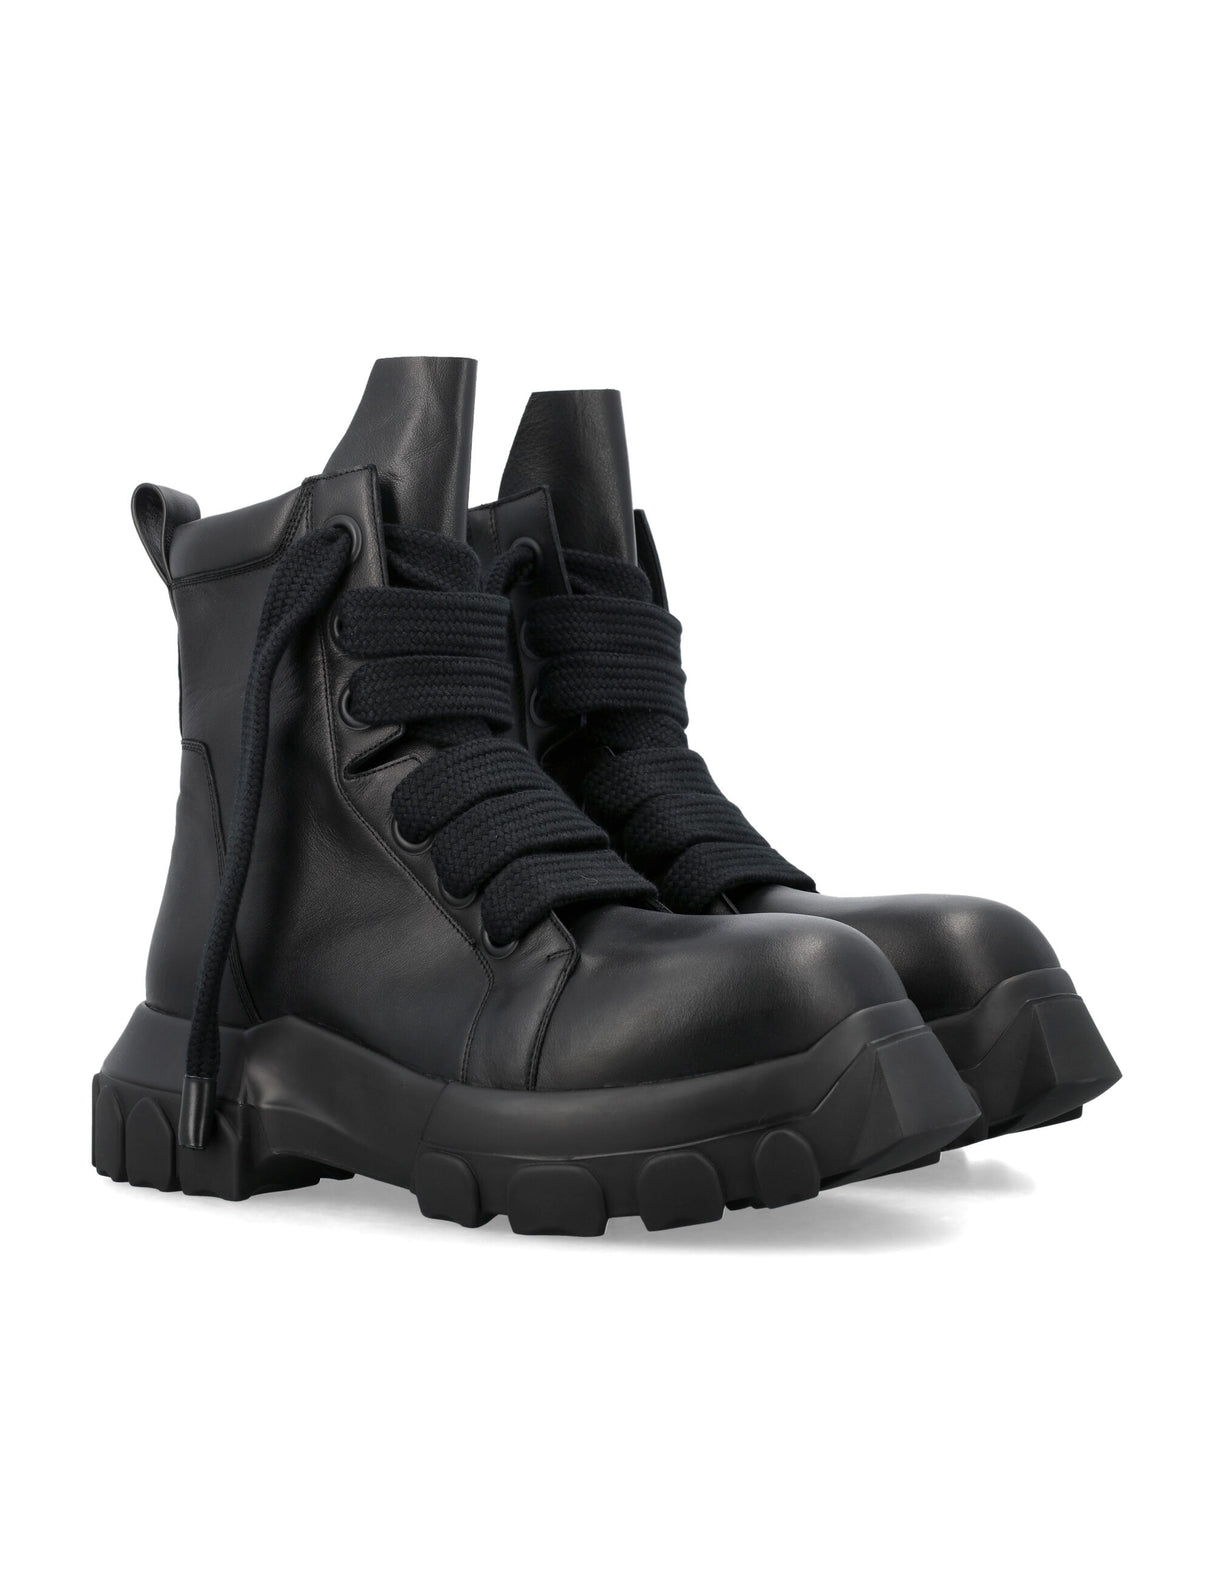  JumboLaced Bozo Tractor Boots - Black